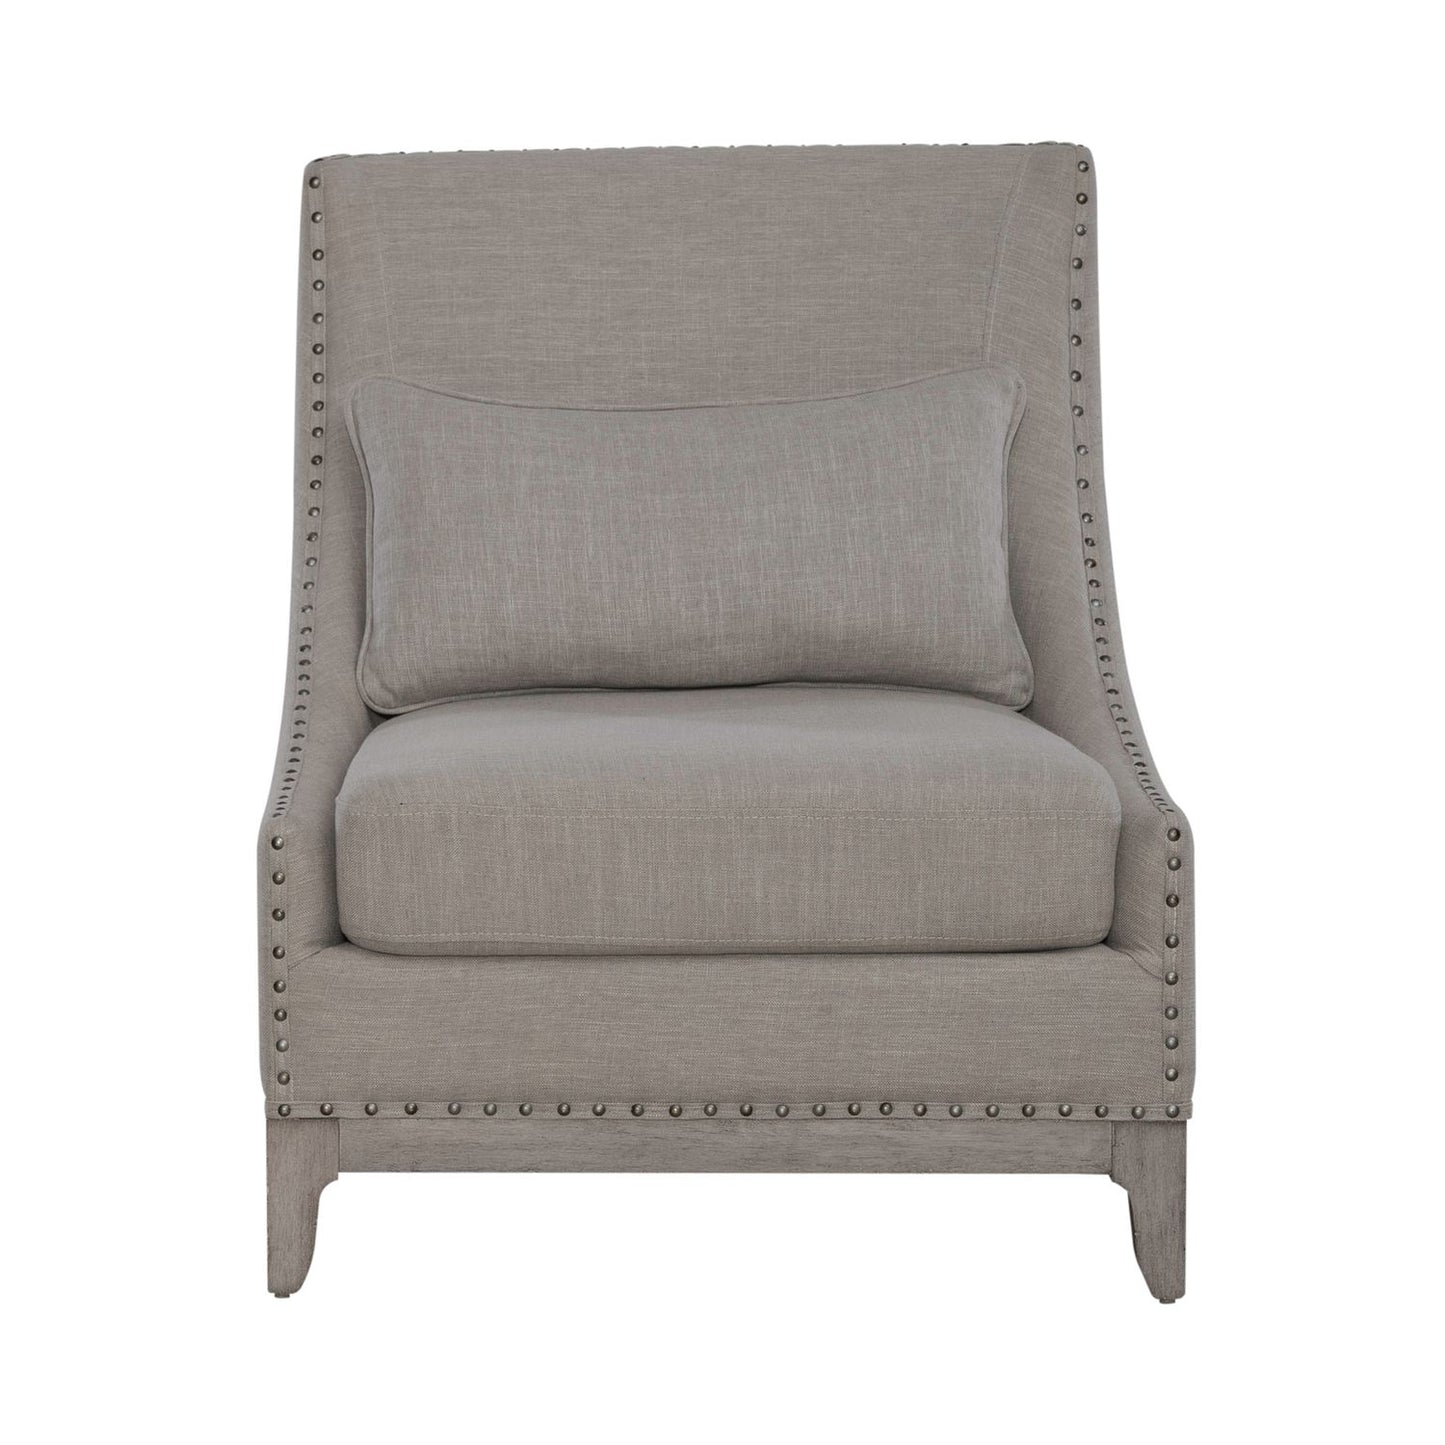 Harlequin - Upholstered Accent Chair